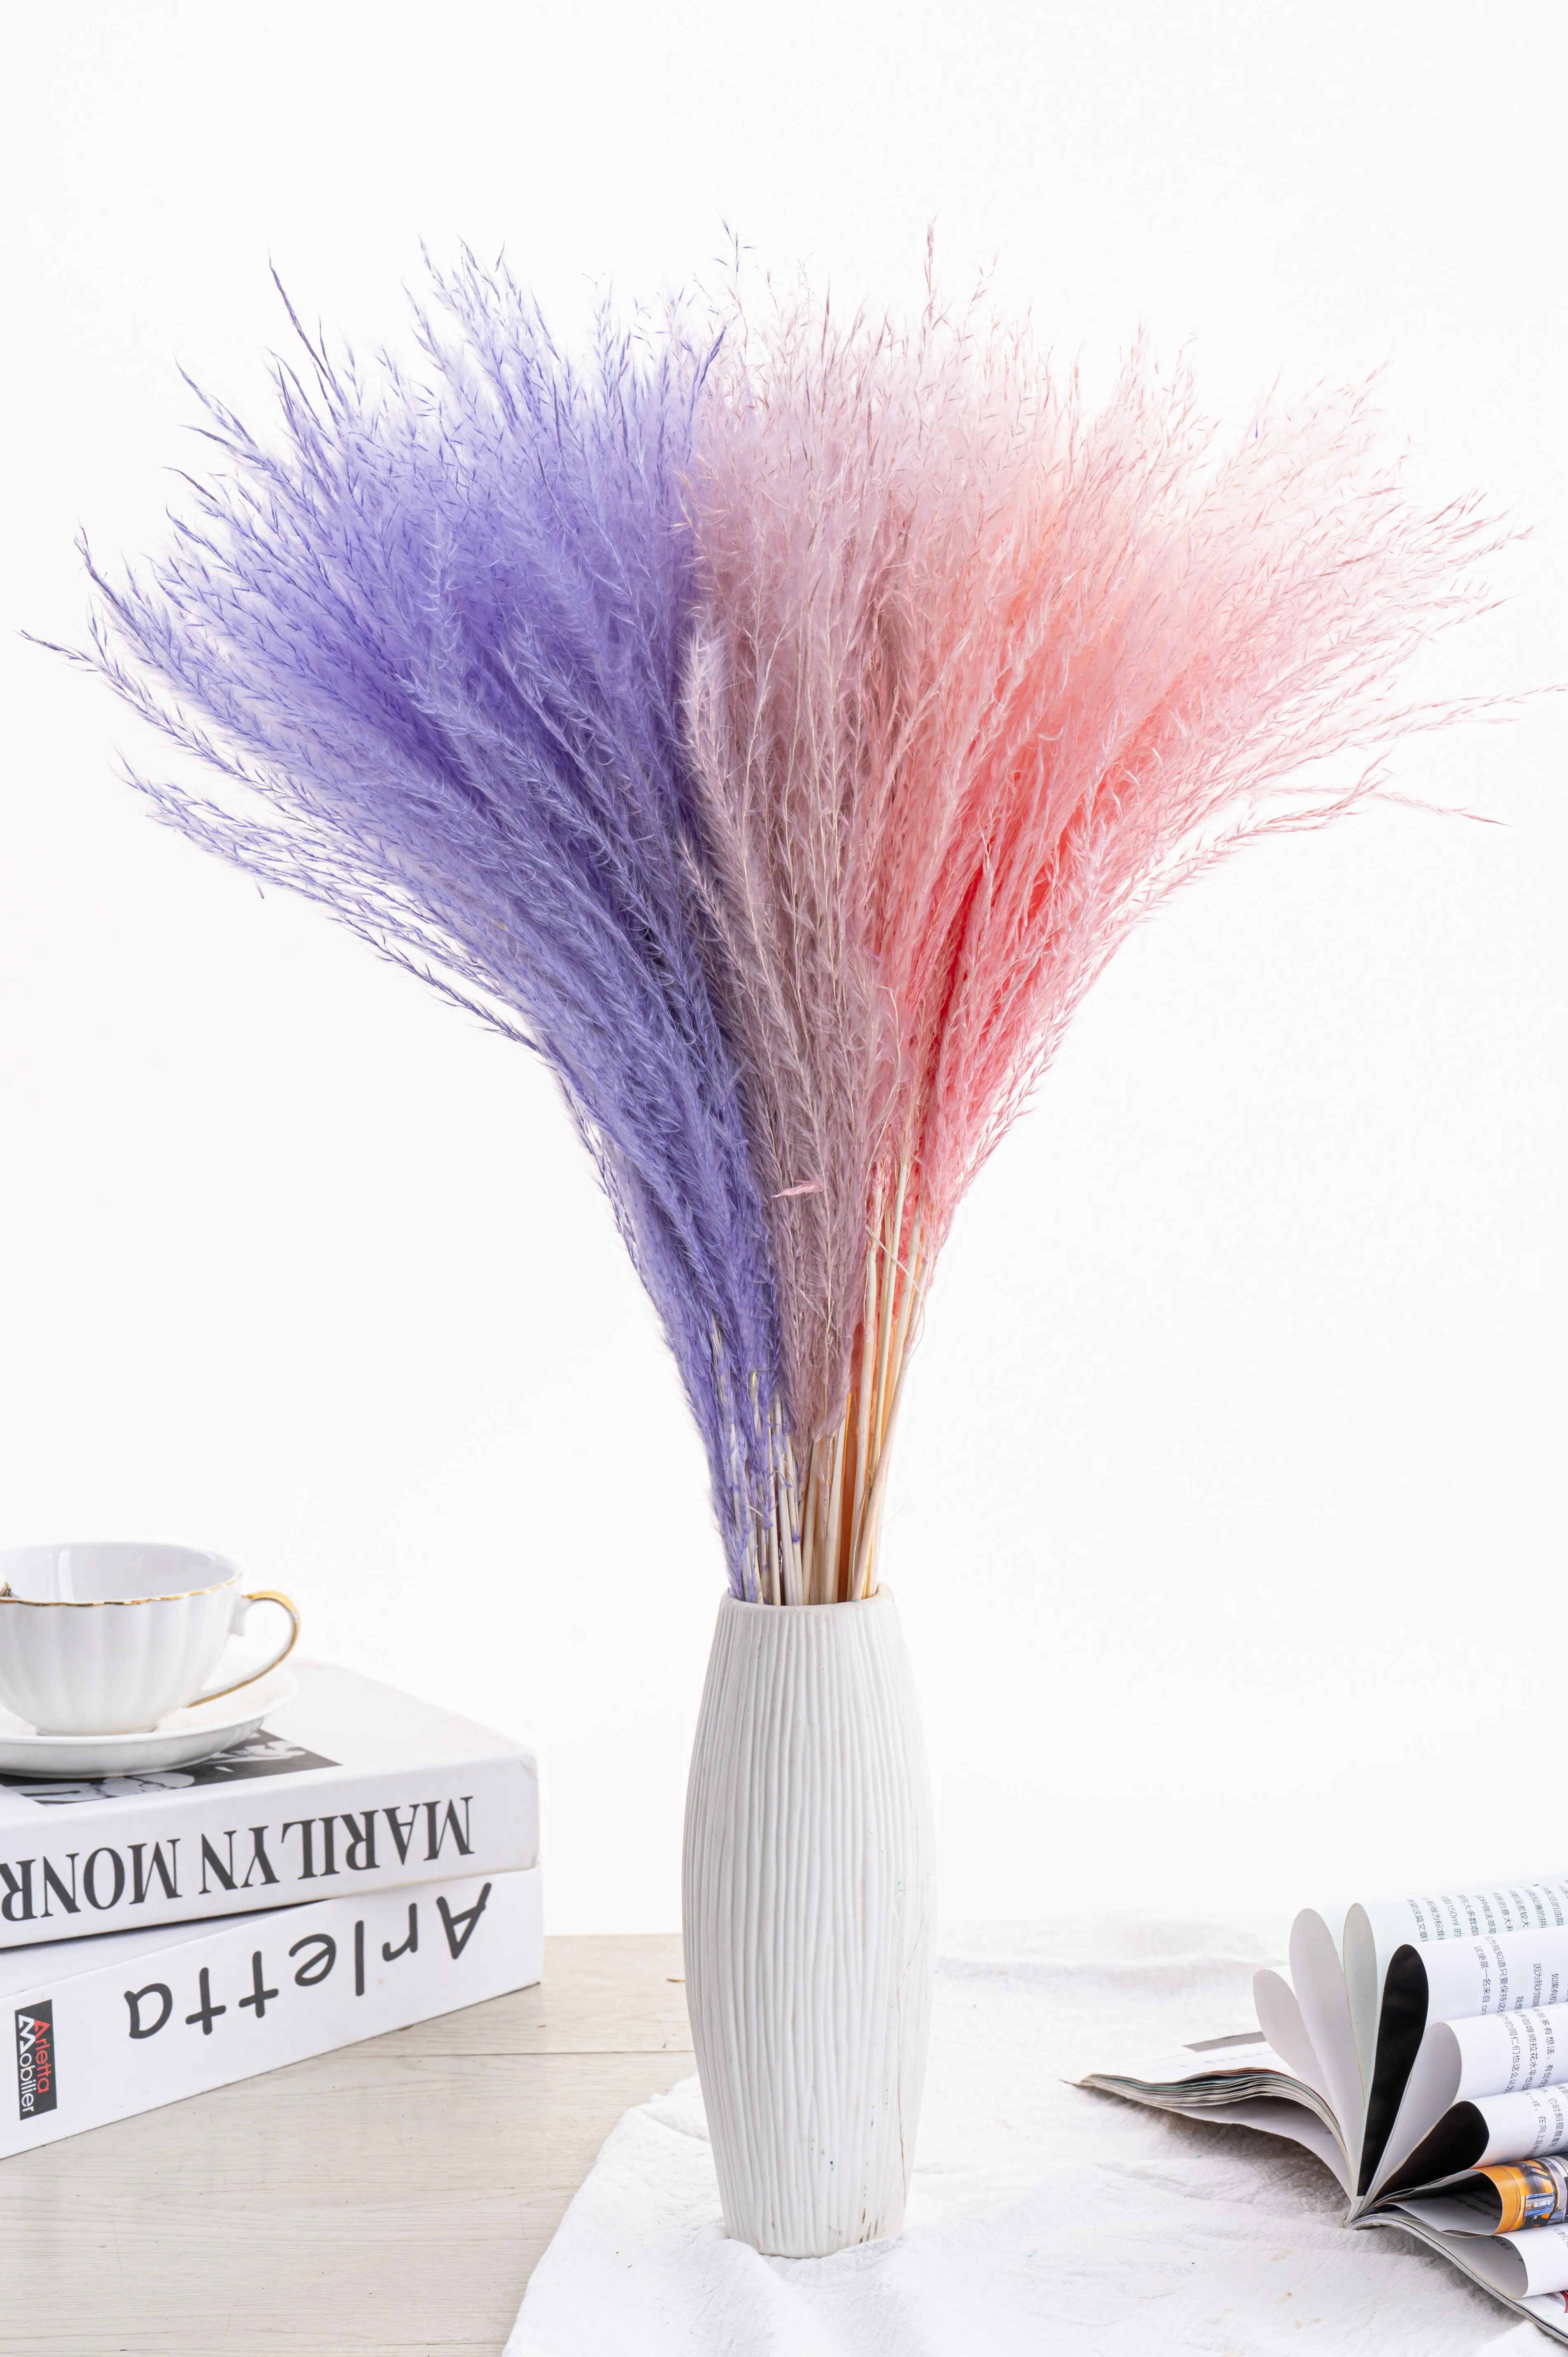 dried flowers   plants flower reed plume luxuriant pampas grass decorative flowers fluffy small reed pampas grass for decor